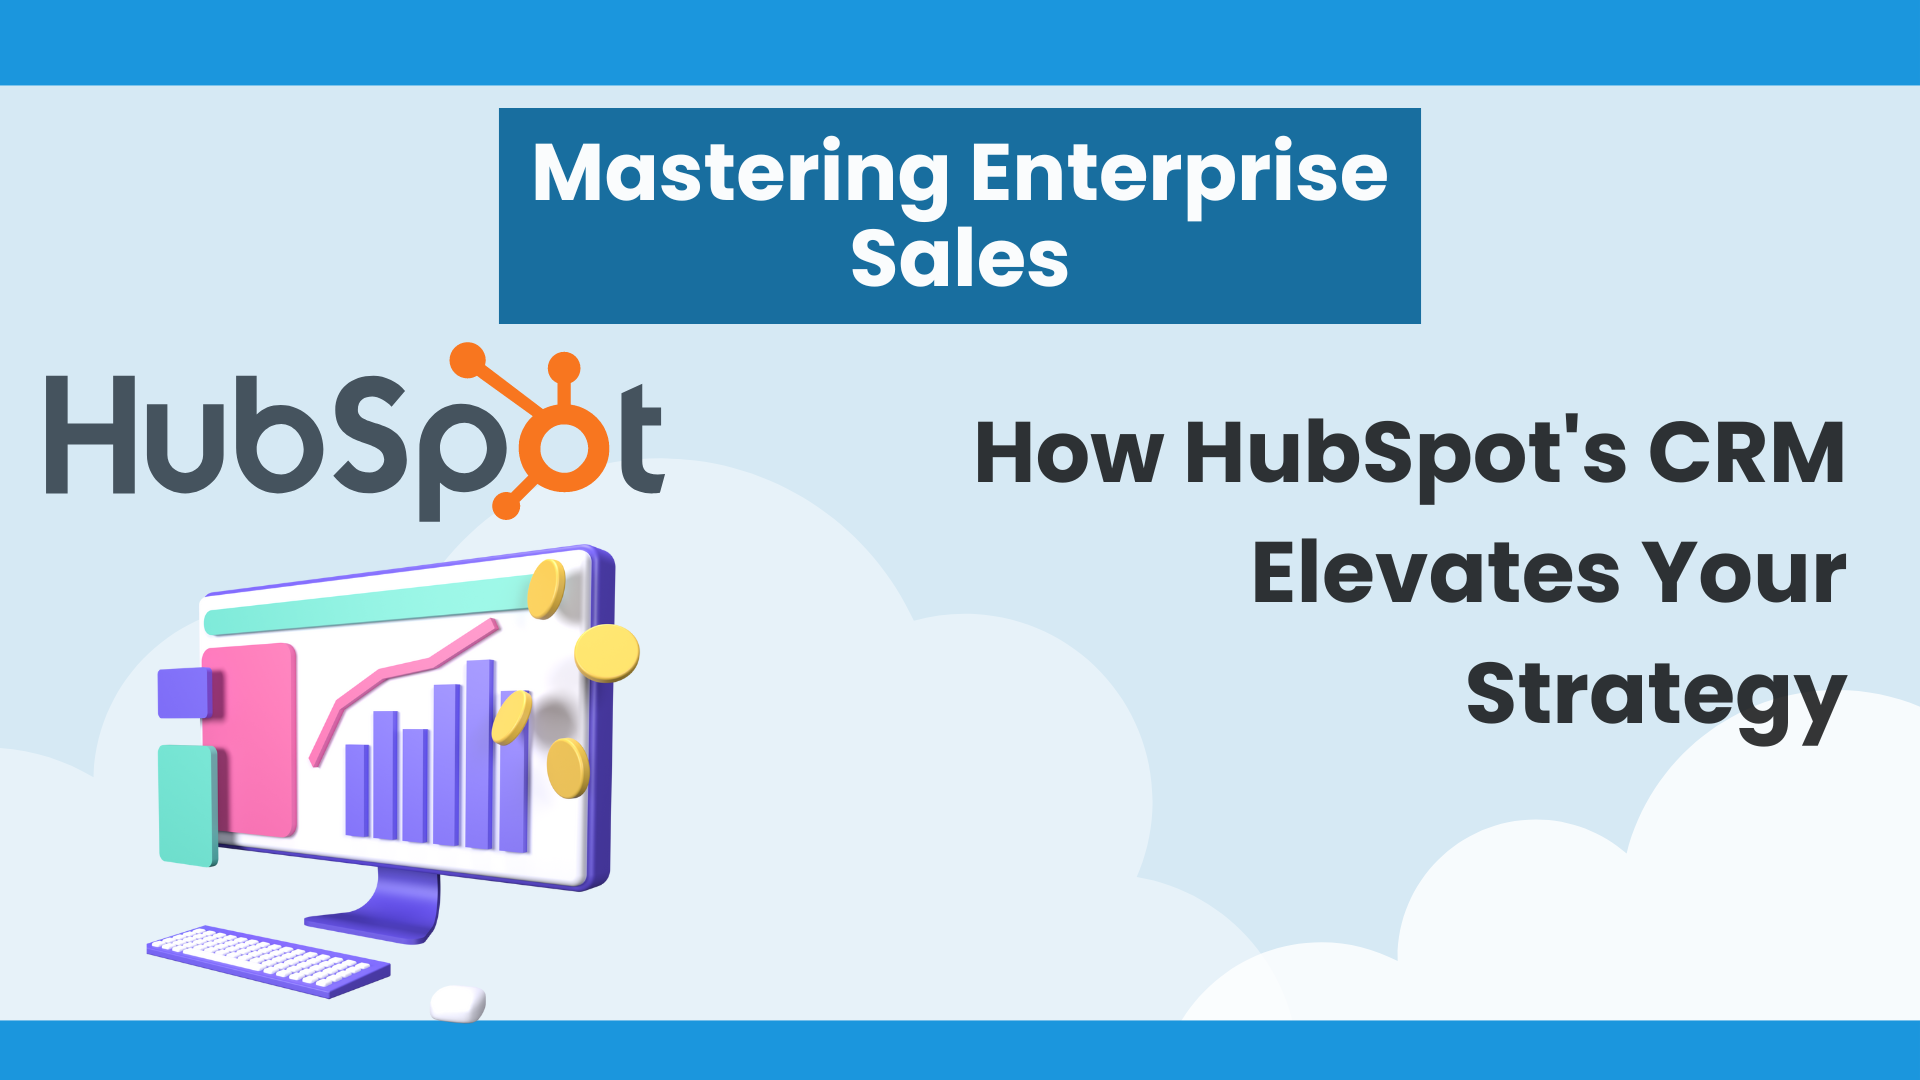 Mastering Enterprise Sales: How HubSpot's CRM Elevates Your Strategy